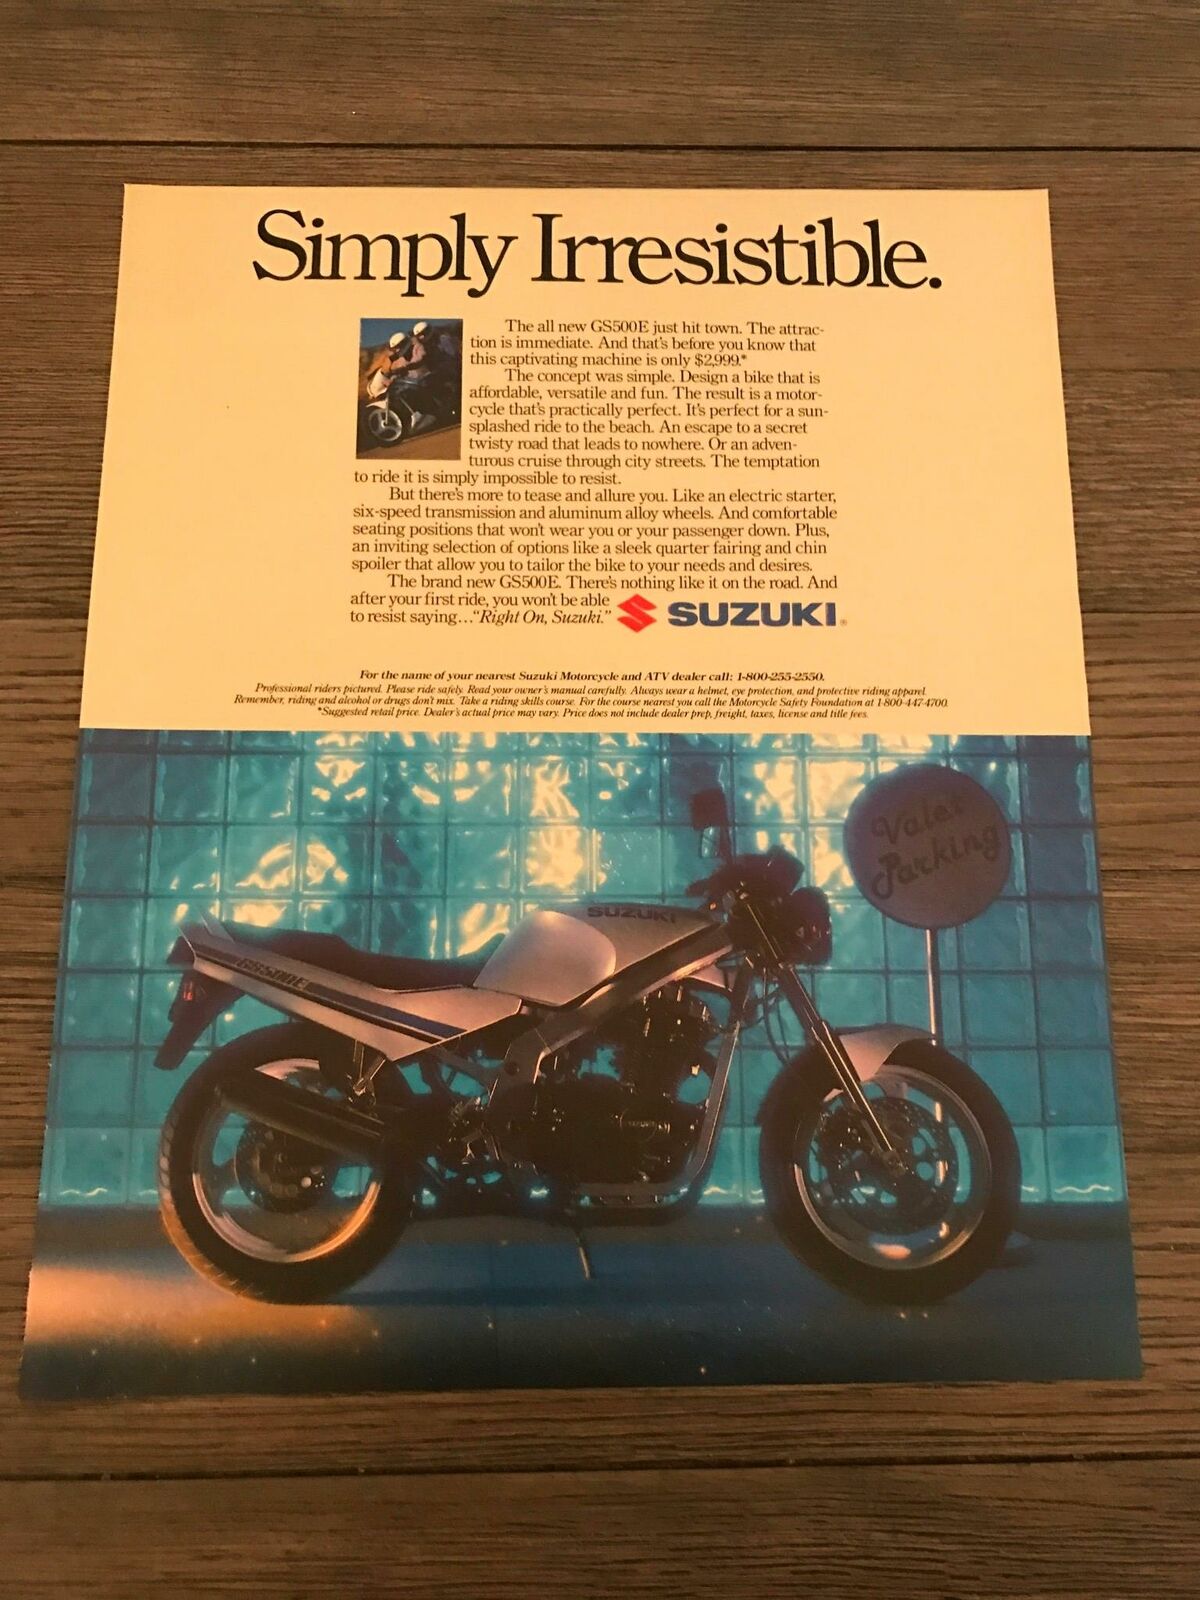 1989 Vintage 10x12 Print Ad For Suzuki Gs500e Motorcycle Simply Irresistible